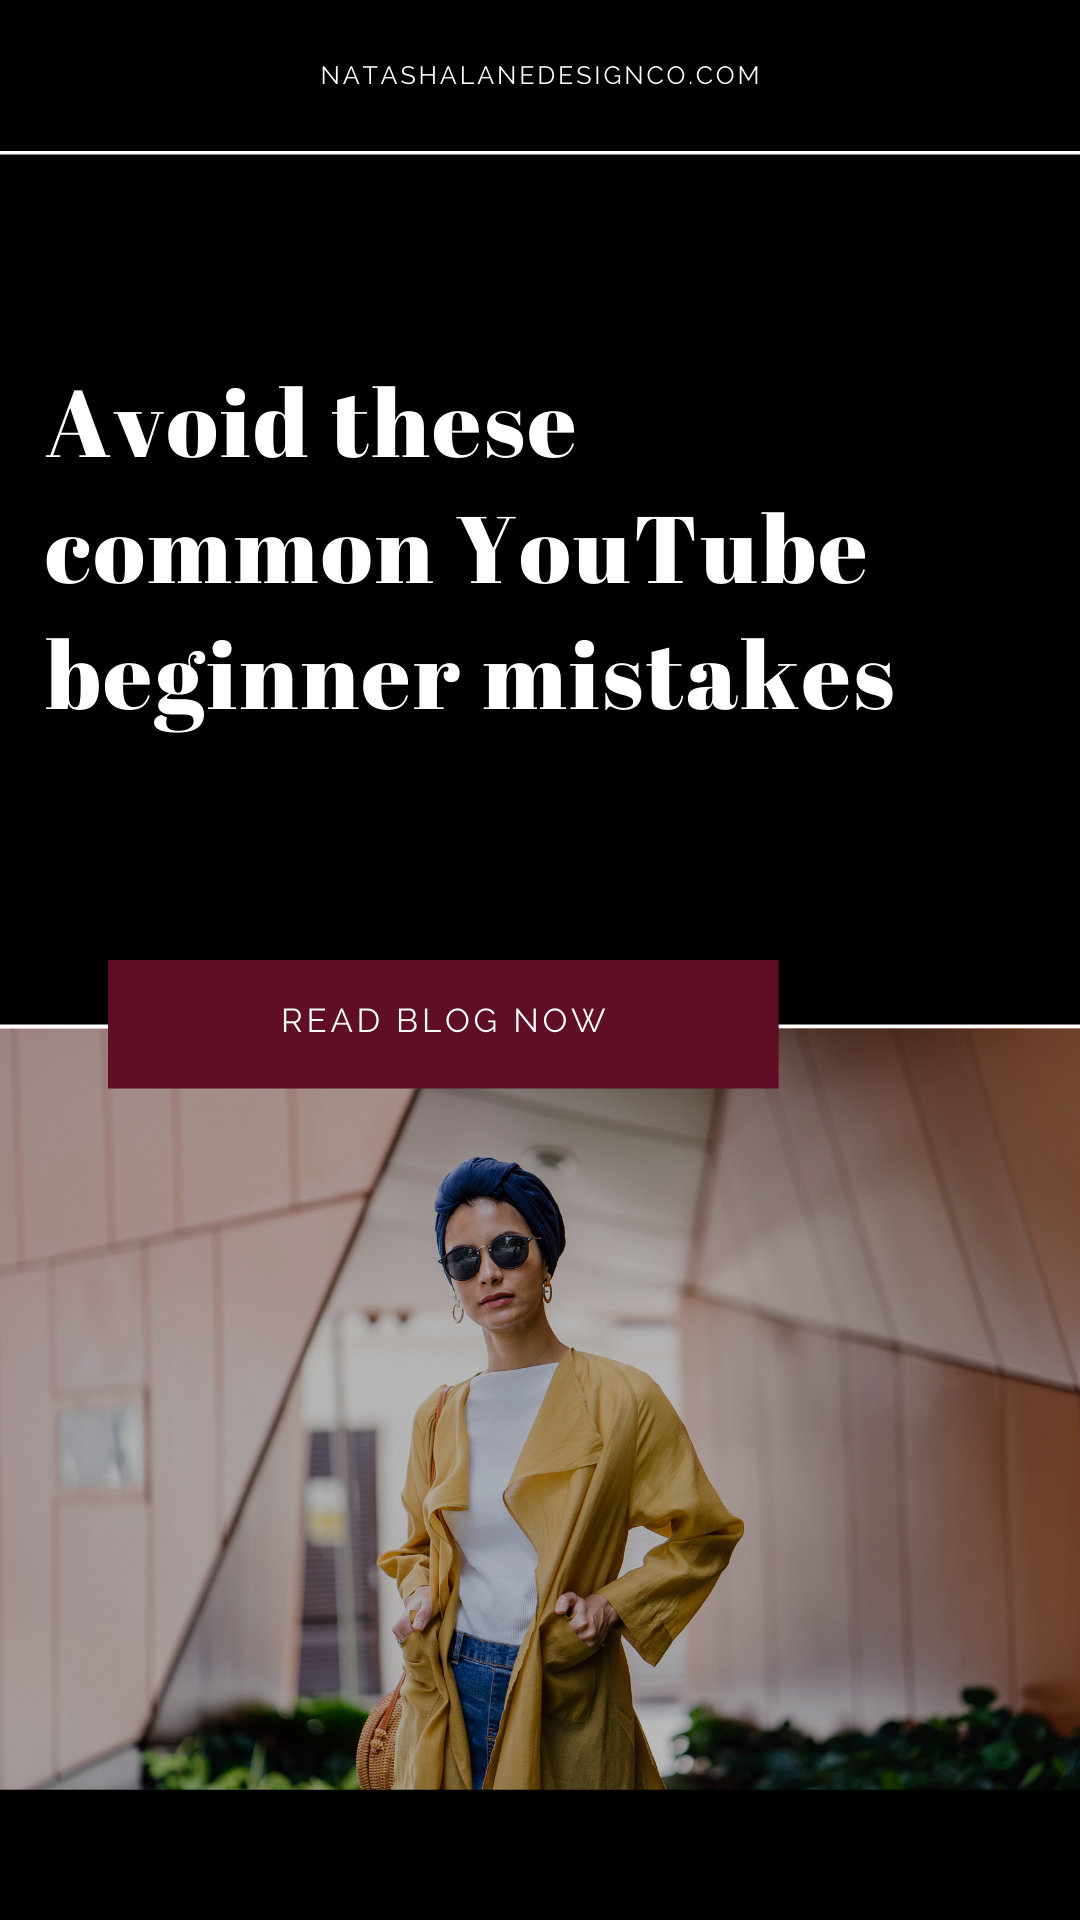 Starting a YouTube channel_ Avoid these common YouTube beginner mistakes (5)